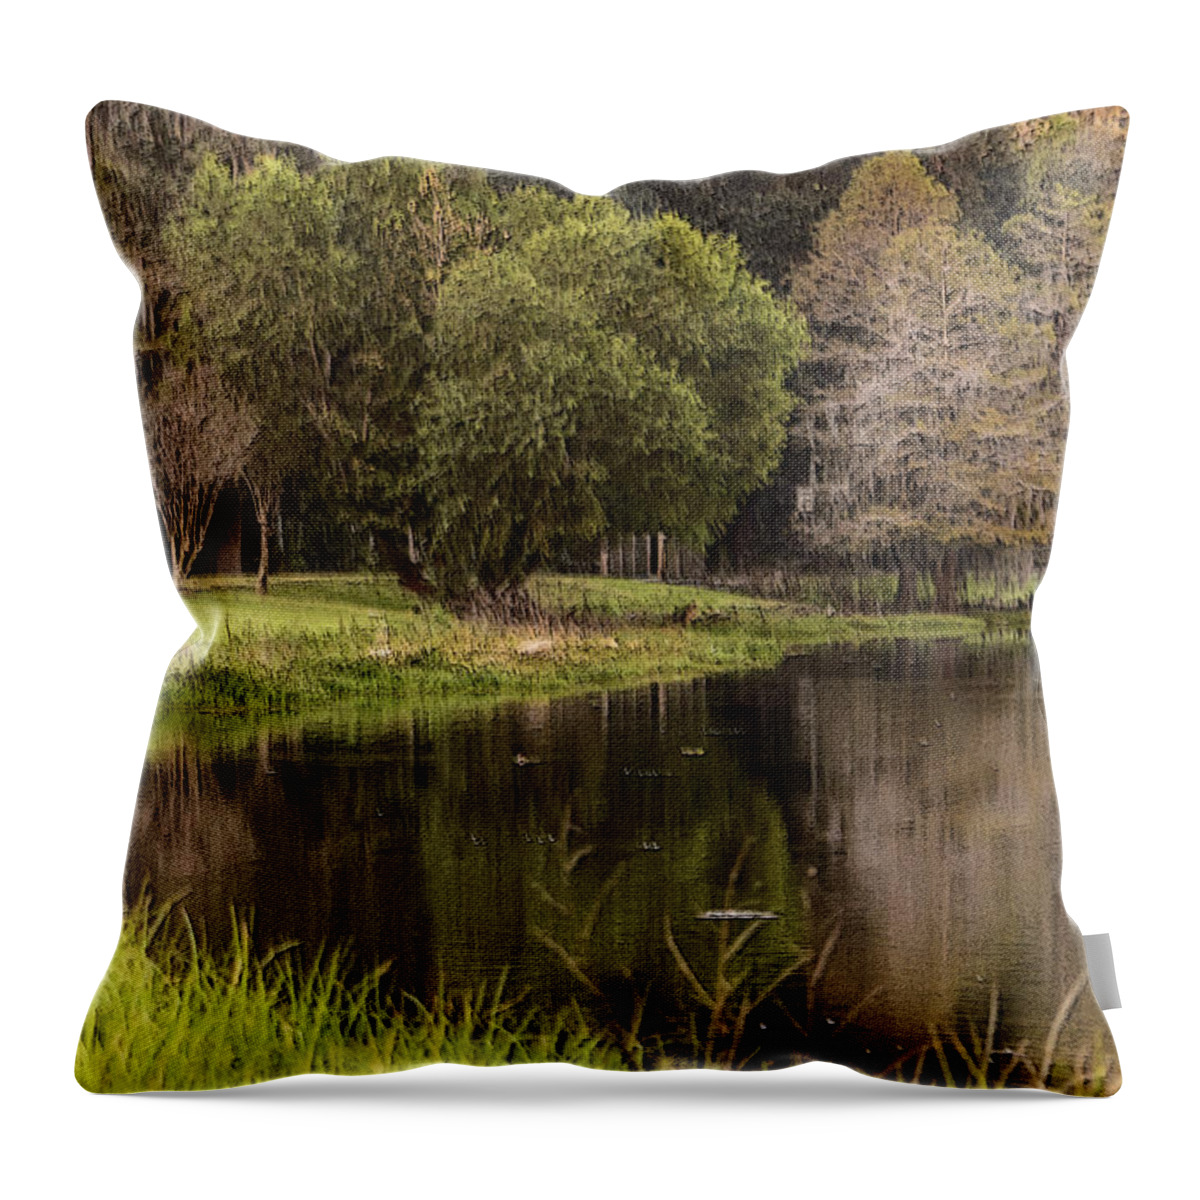 Fishing Throw Pillow featuring the photograph Intent by Leticia Latocki